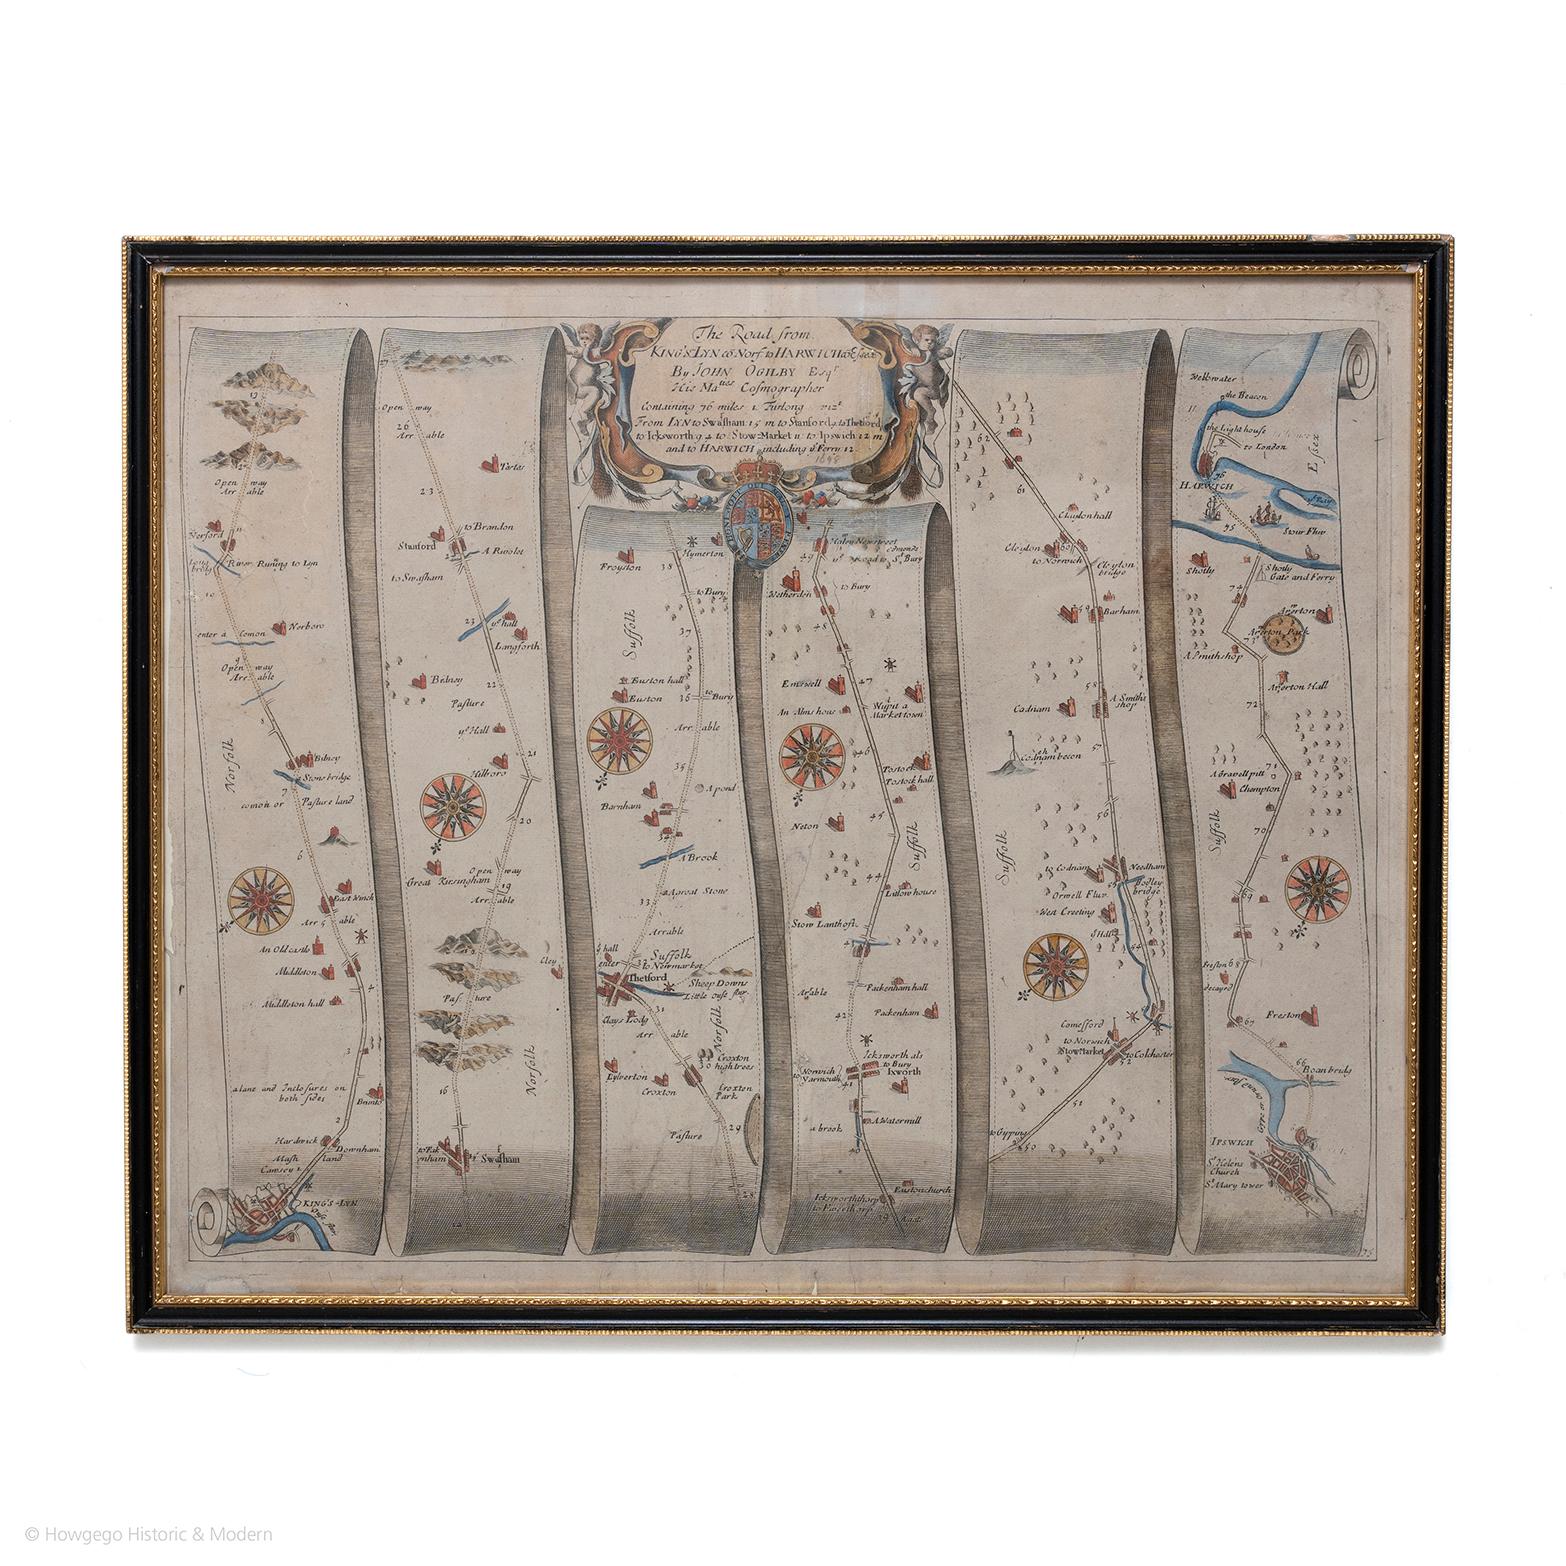 The Road from Kings Lyn Co Norfolk to Harwich Co Essex. By John Ogilby His Majesties Cosmographer. Containing 76 miles, 1 furlong. 

From Lyn to Swaffam, to Stanford, to Thetford, To Icksworth, to Stowmarket, to Ipswich and to Harwich including ye